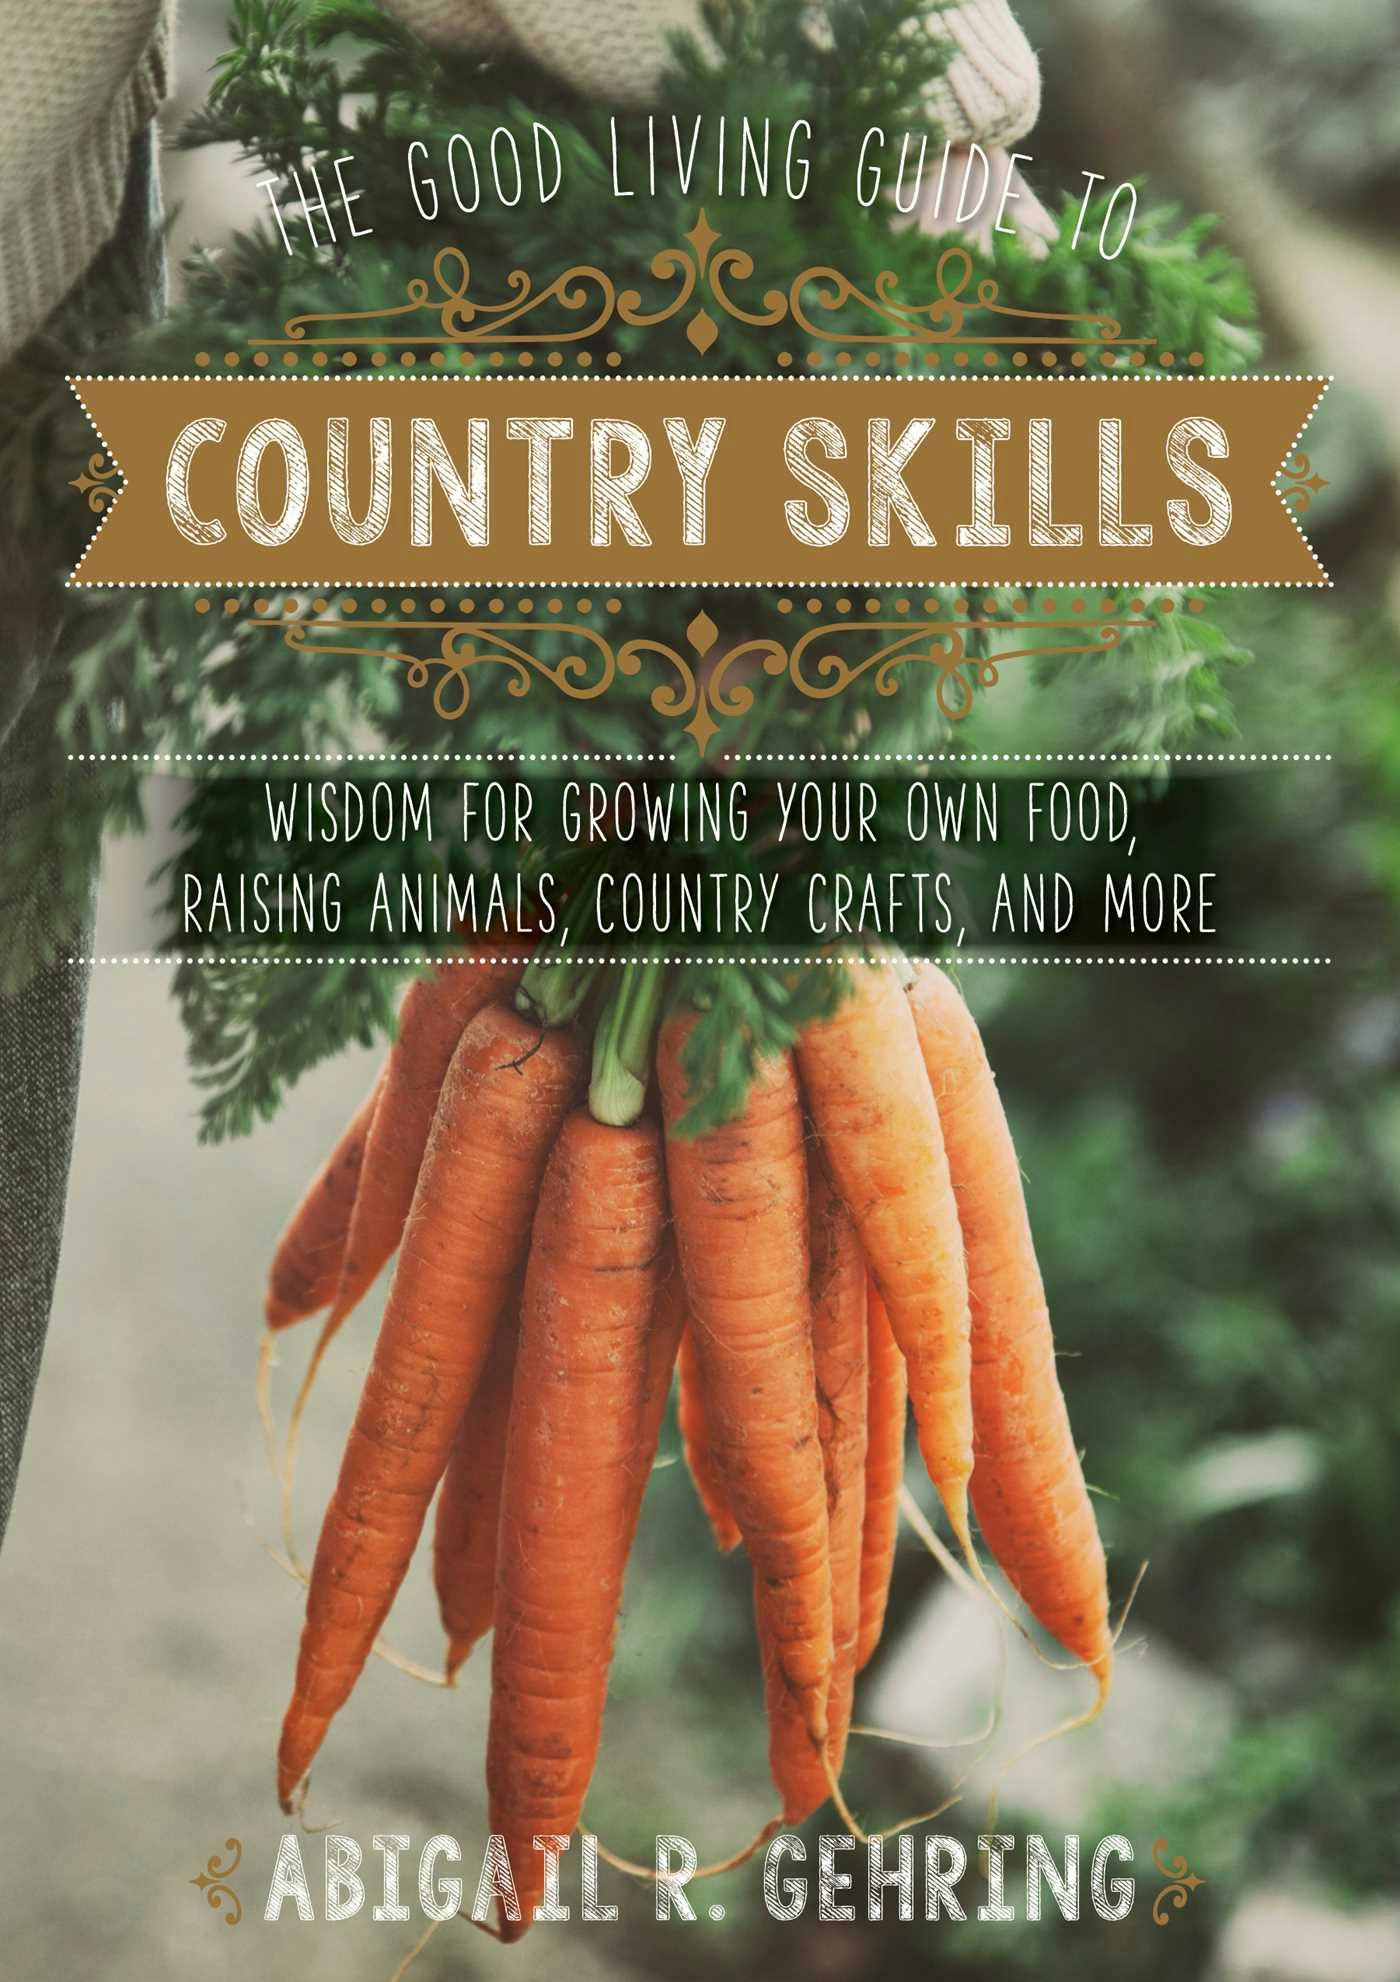 The Good Living Guide to Country Skills: Wisdom for Growing Your Own Food, Raising Animals, Canning and Fermenting, and More - Abigail Gehring